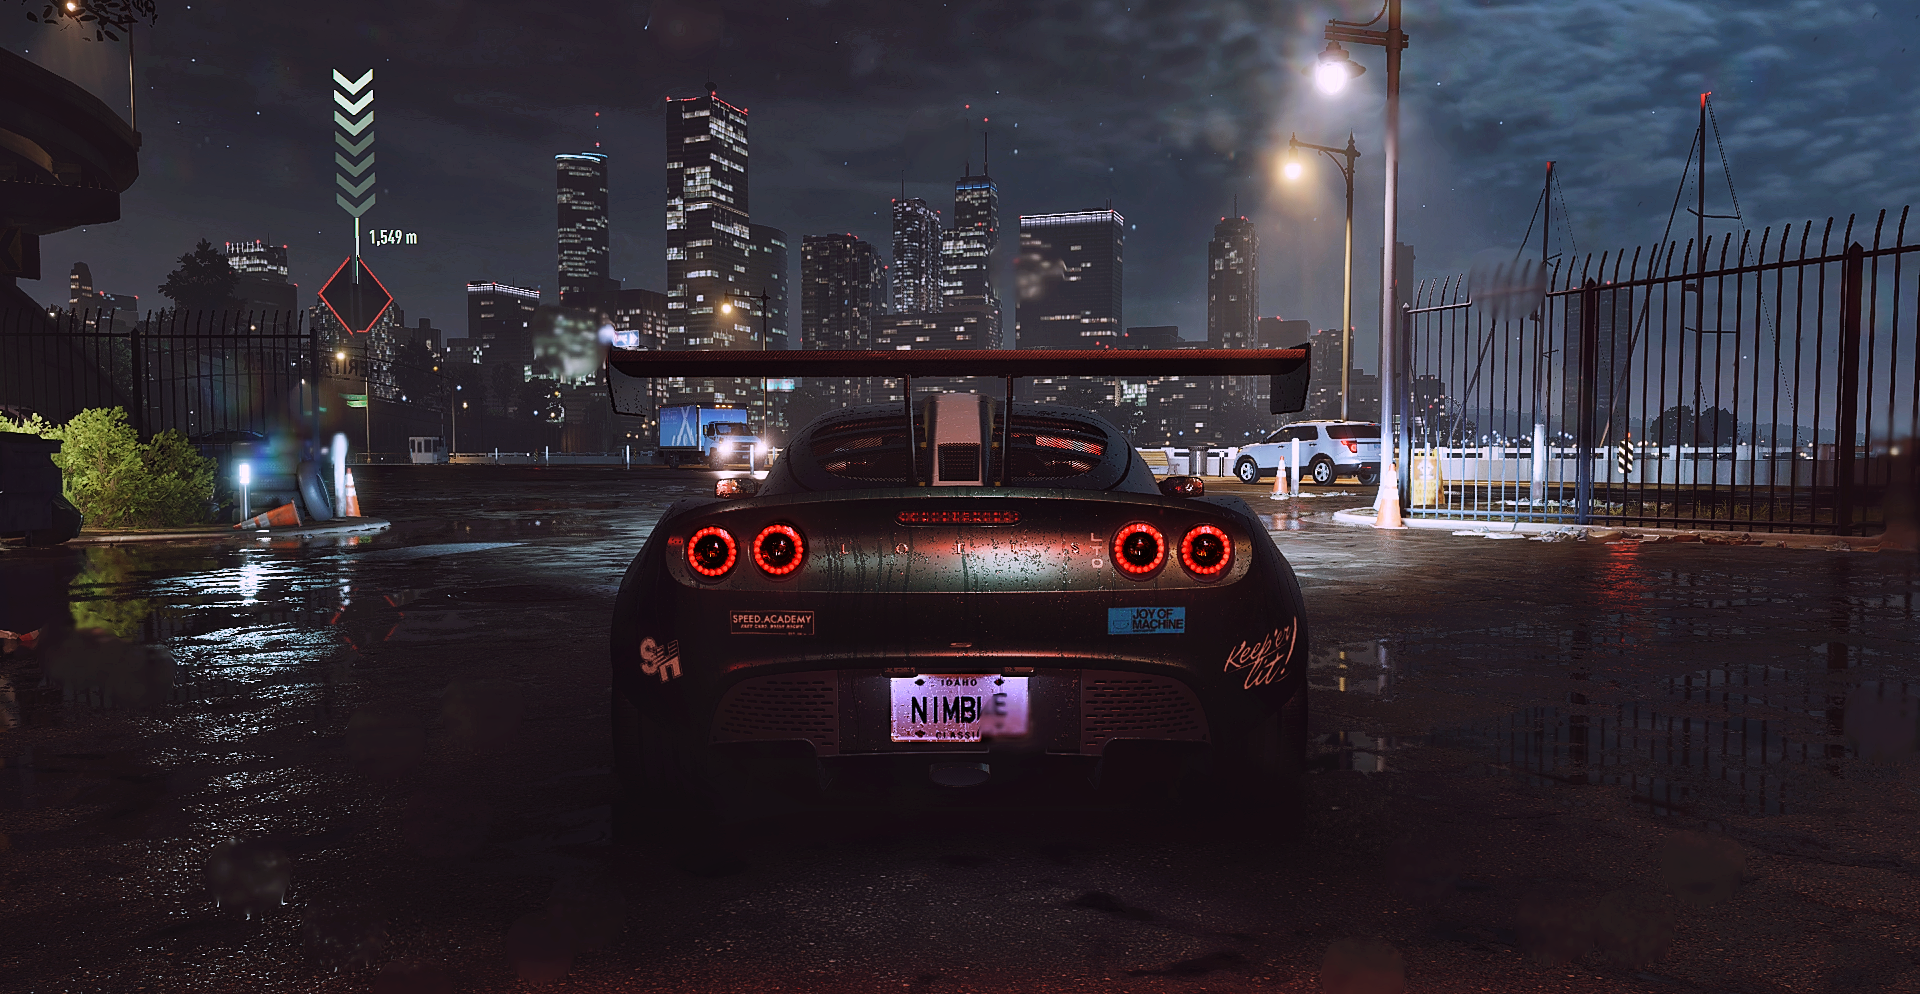 General 1920x994 Need for speed Unbound Need for Speed edit race cars car park EA Games Criterion Games video games car licence plates taillights city lights street light night